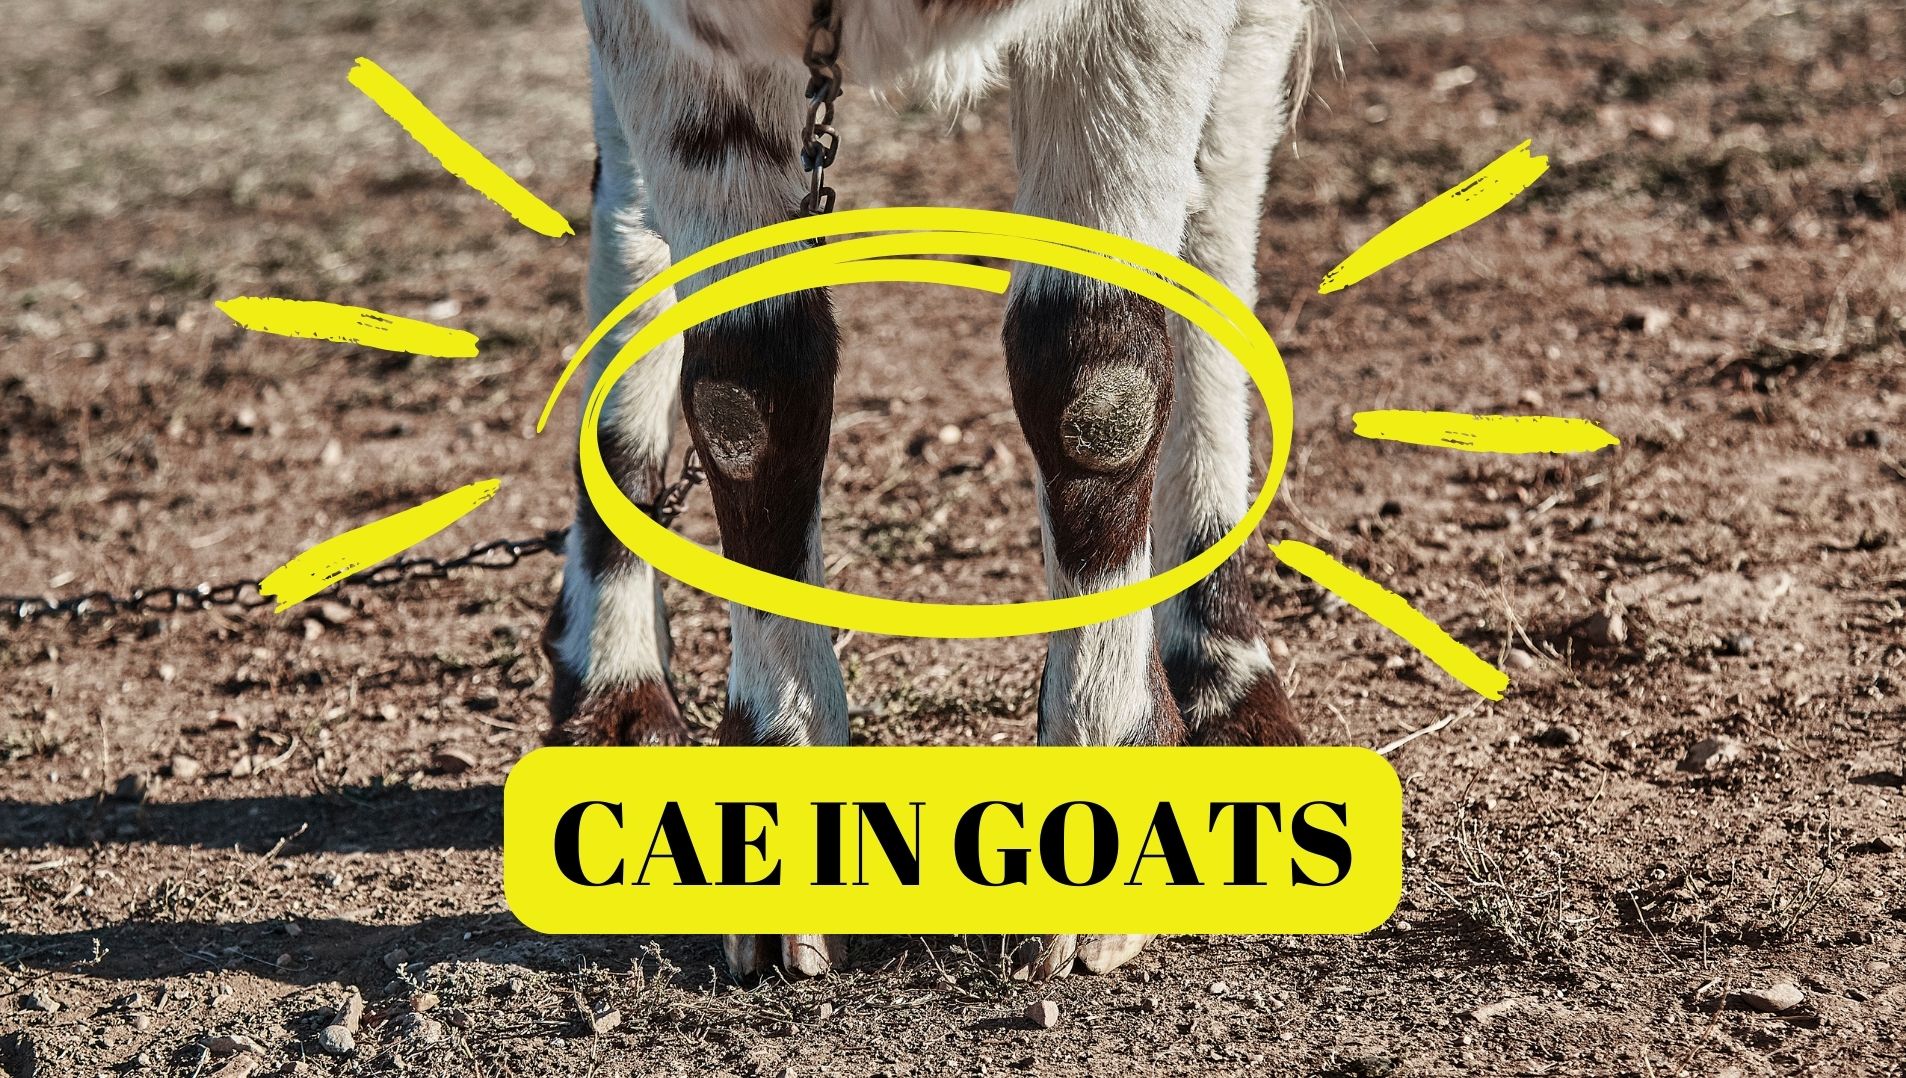 CAE in goats causes arthritis and knobby knees 